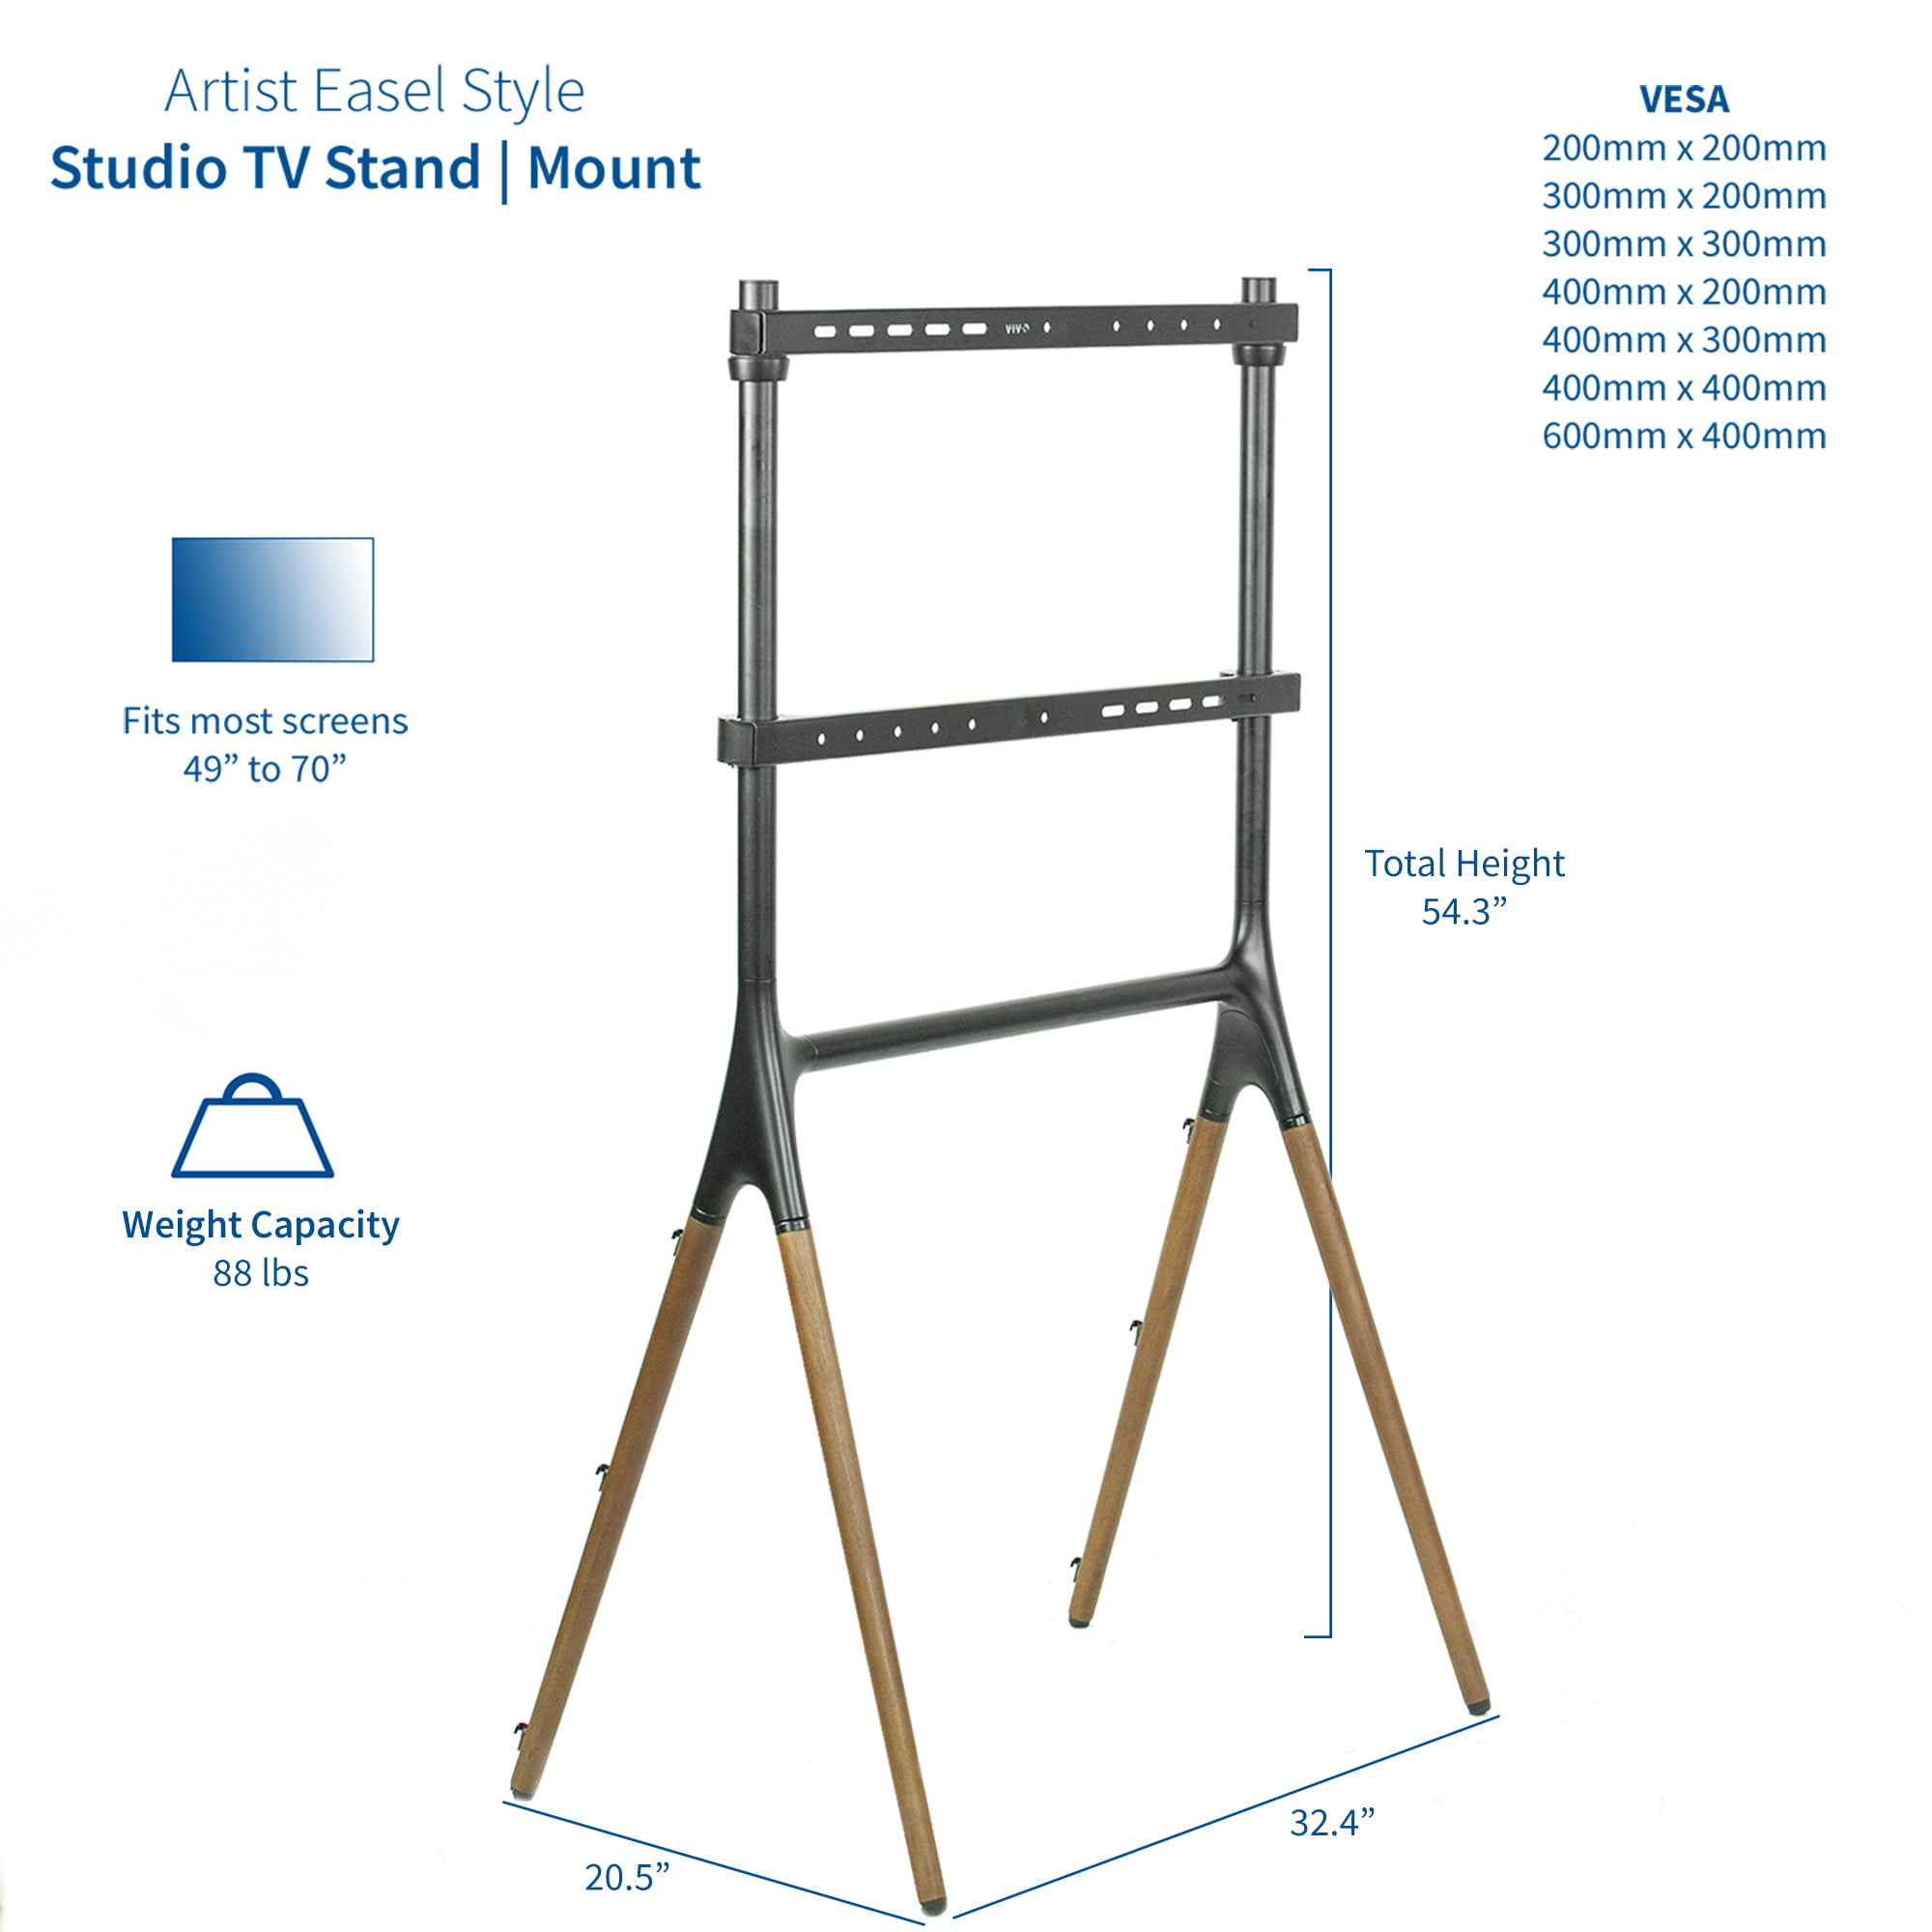 Suitable for Living Room Meeting Room Glorider Artistic Tripod Easel TV Floor Stand for 45-65 Inch Screens Tripod Base and Non-Slip Pads Portable TV Mount with Height Adjustment 25.6 inch Office 